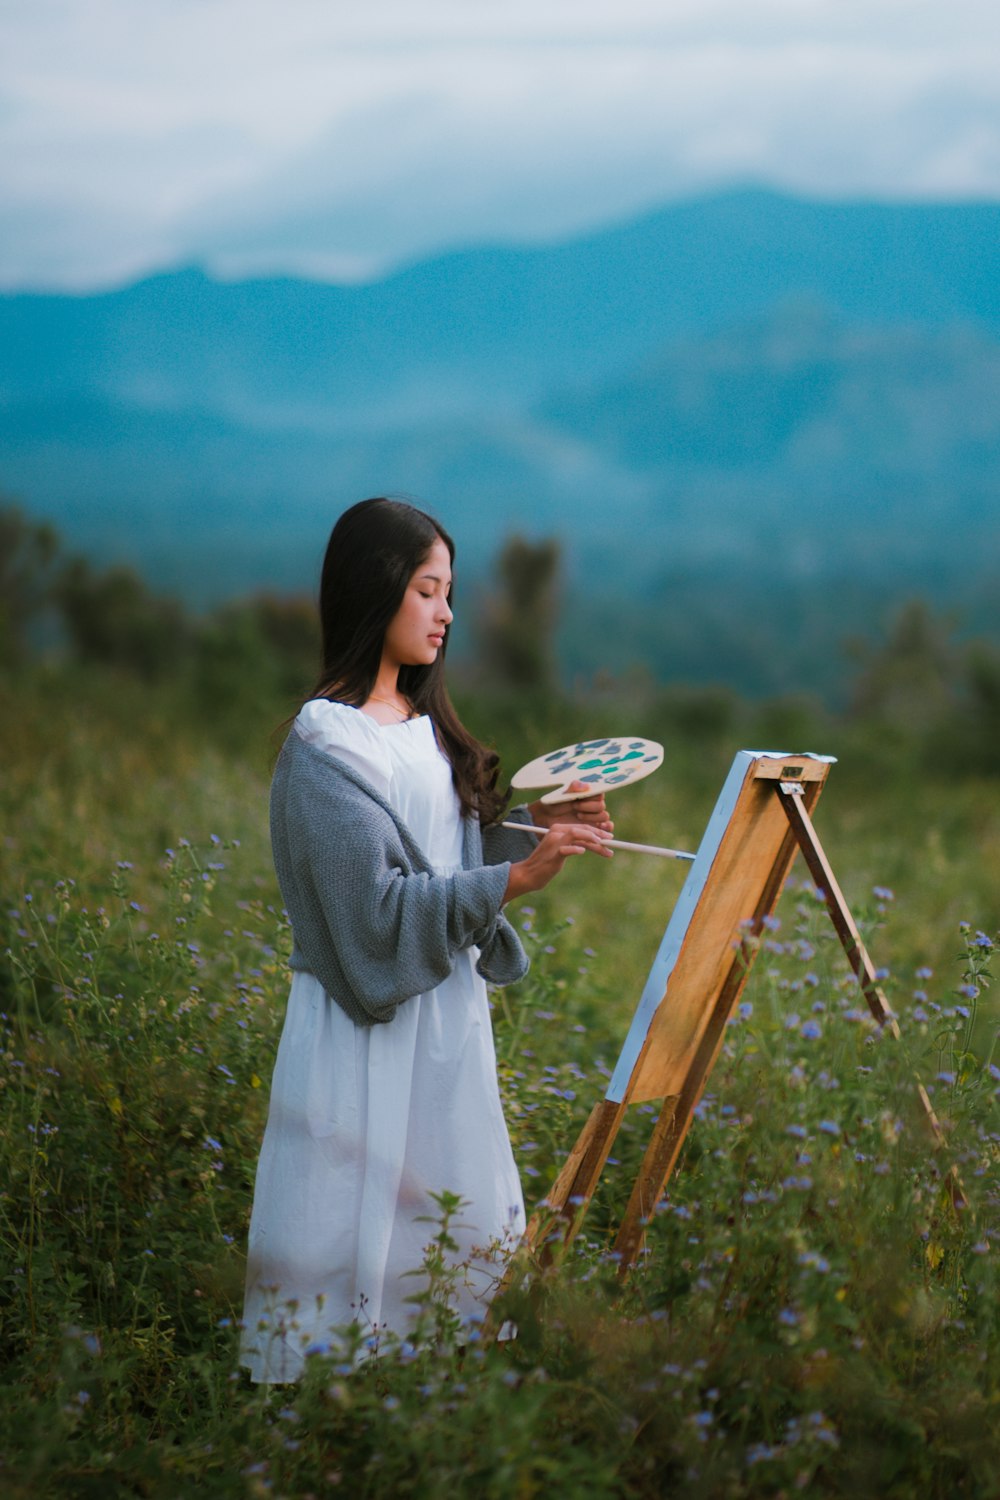 a woman in a white dress holding a frisbee